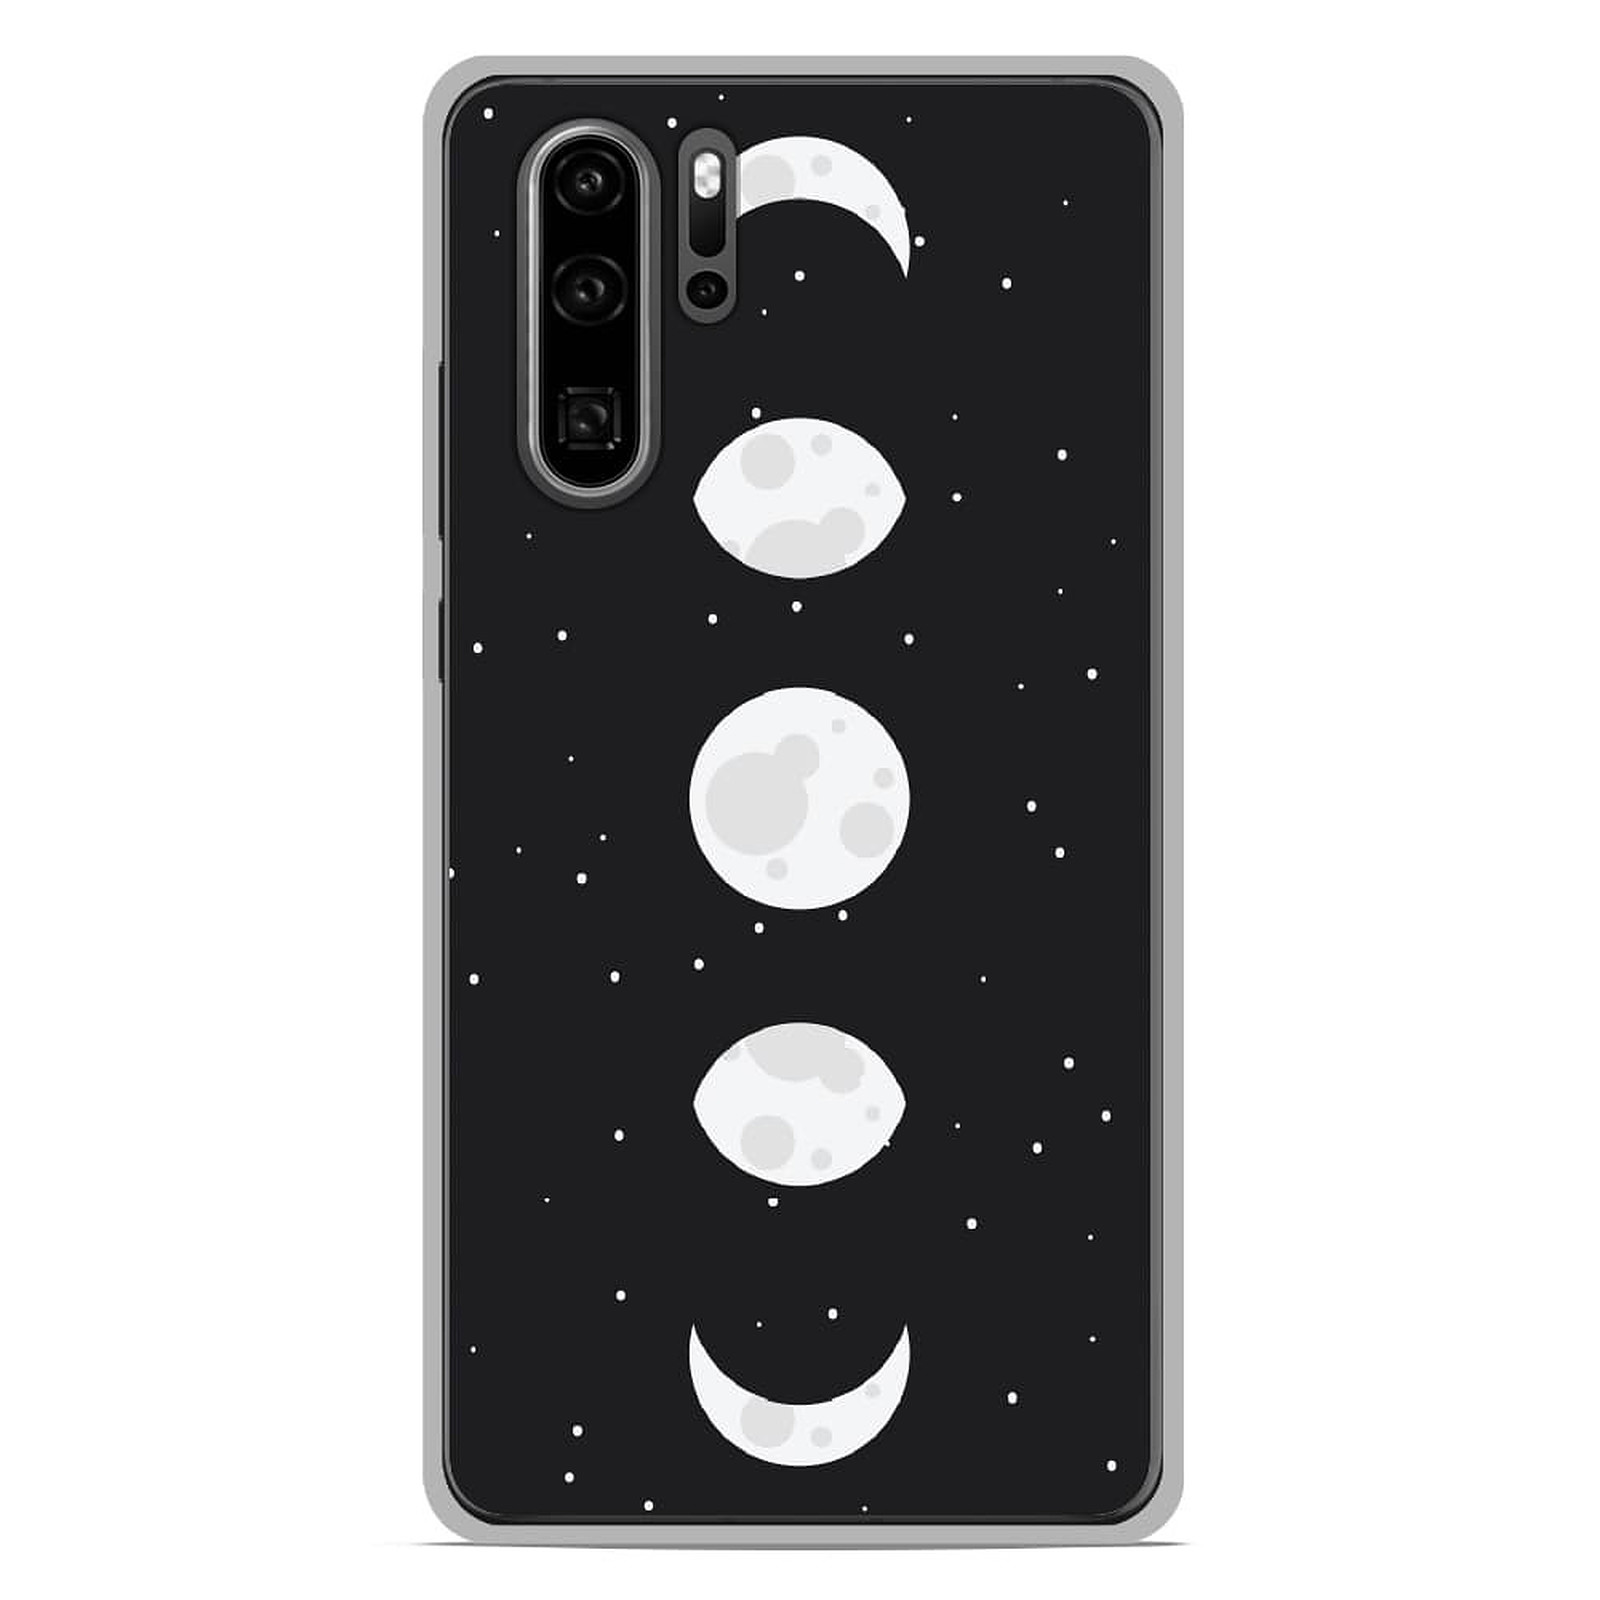 1001 Coques Coque silicone gel Huawei P30 Pro motif Phase de Lune - Coque telephone 1001Coques